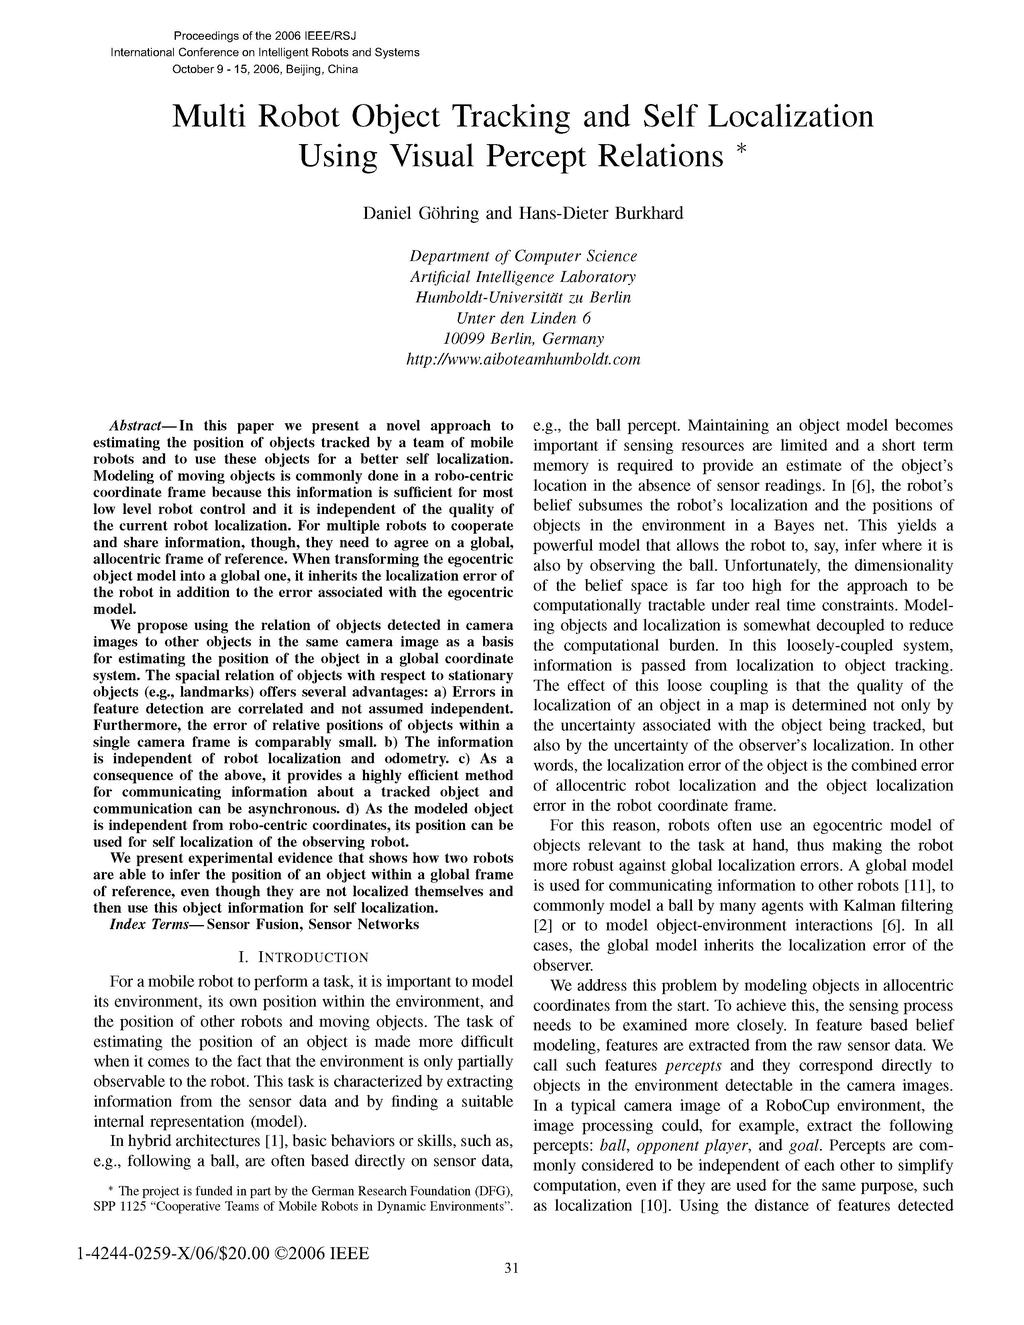 Proceedings of the 2006 IEEE/RSJ International Conference on Intelligent Robots and Systems October 9-5, 2006, Beijing, China Multi Robot Object Tracking and Self Localization Using Visual Percept